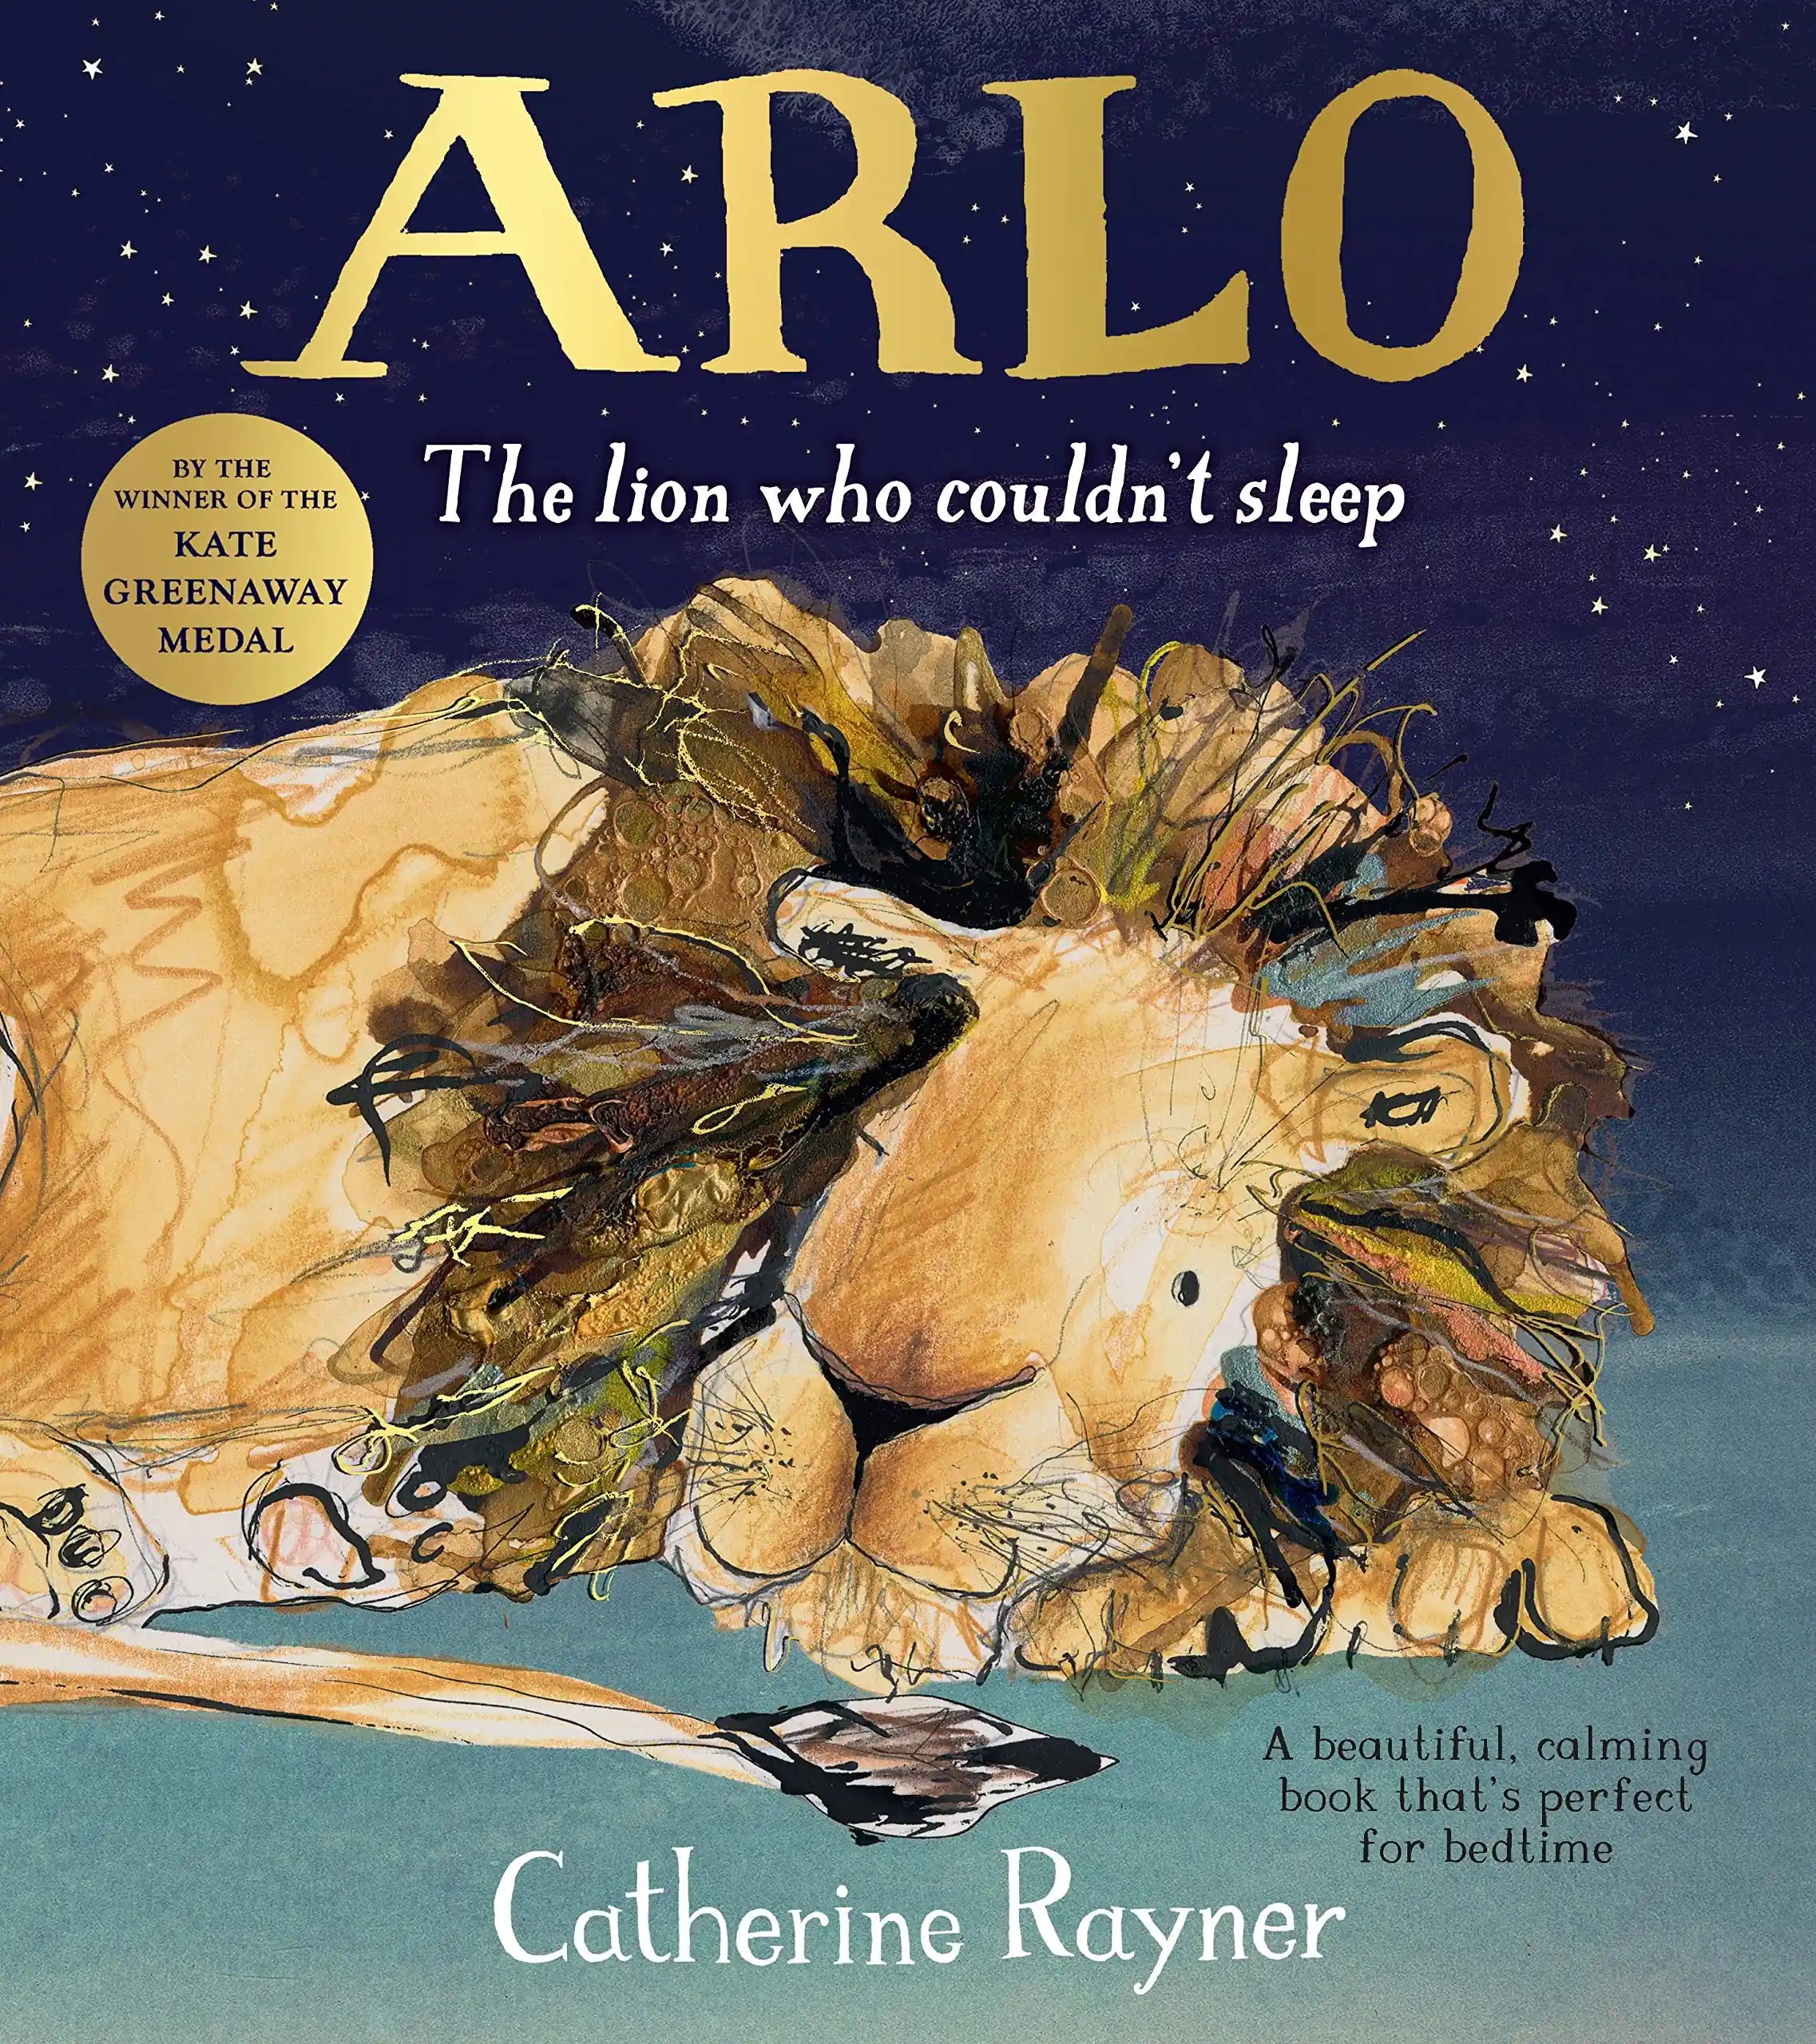 Arlo The Lion | Children's Book | by Catherine Rayner - Lifestory